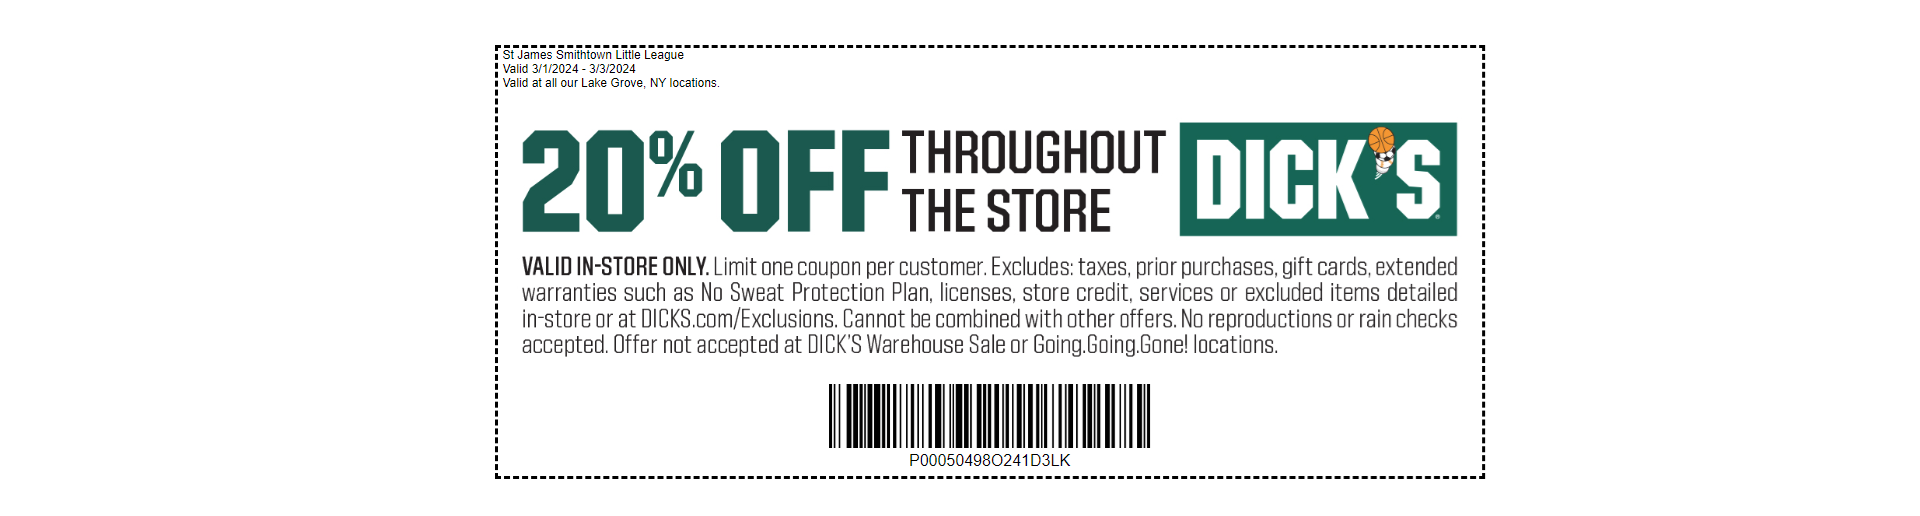 Save 20% at Dick's from 3/1-3/3